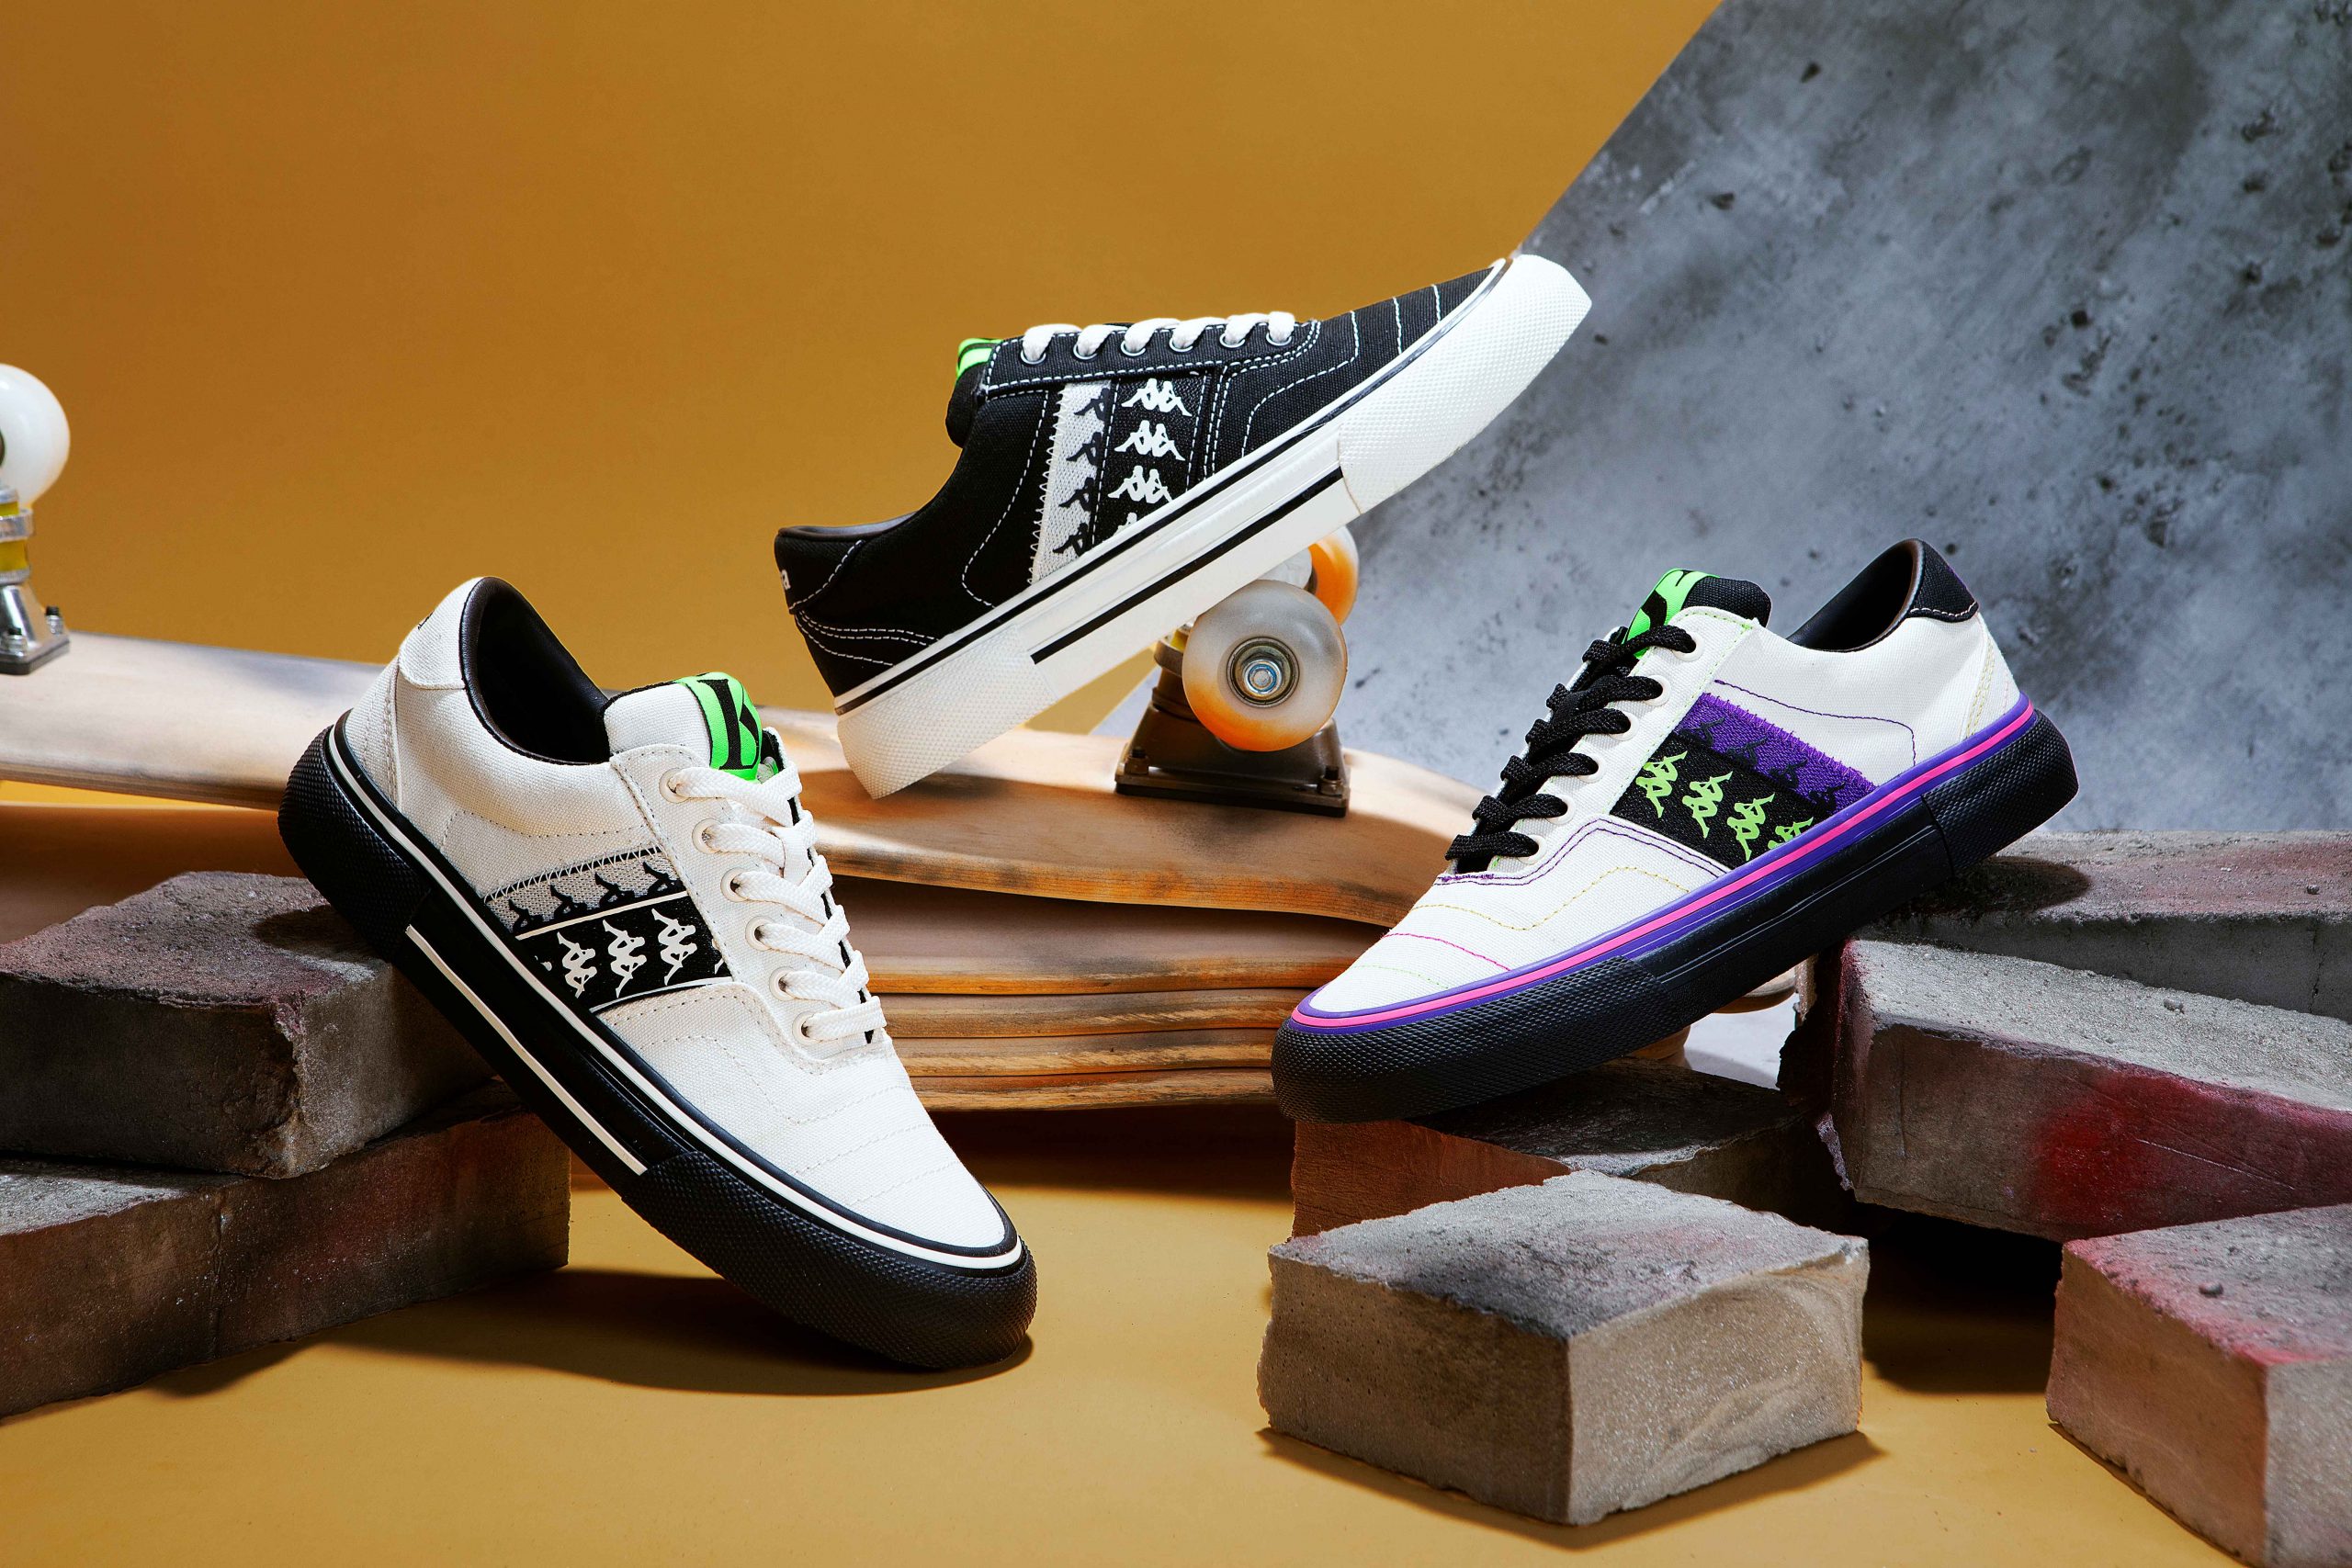 When century-old sports brand Kappa enters the skateboarding field, what surprises will see? - iMedia